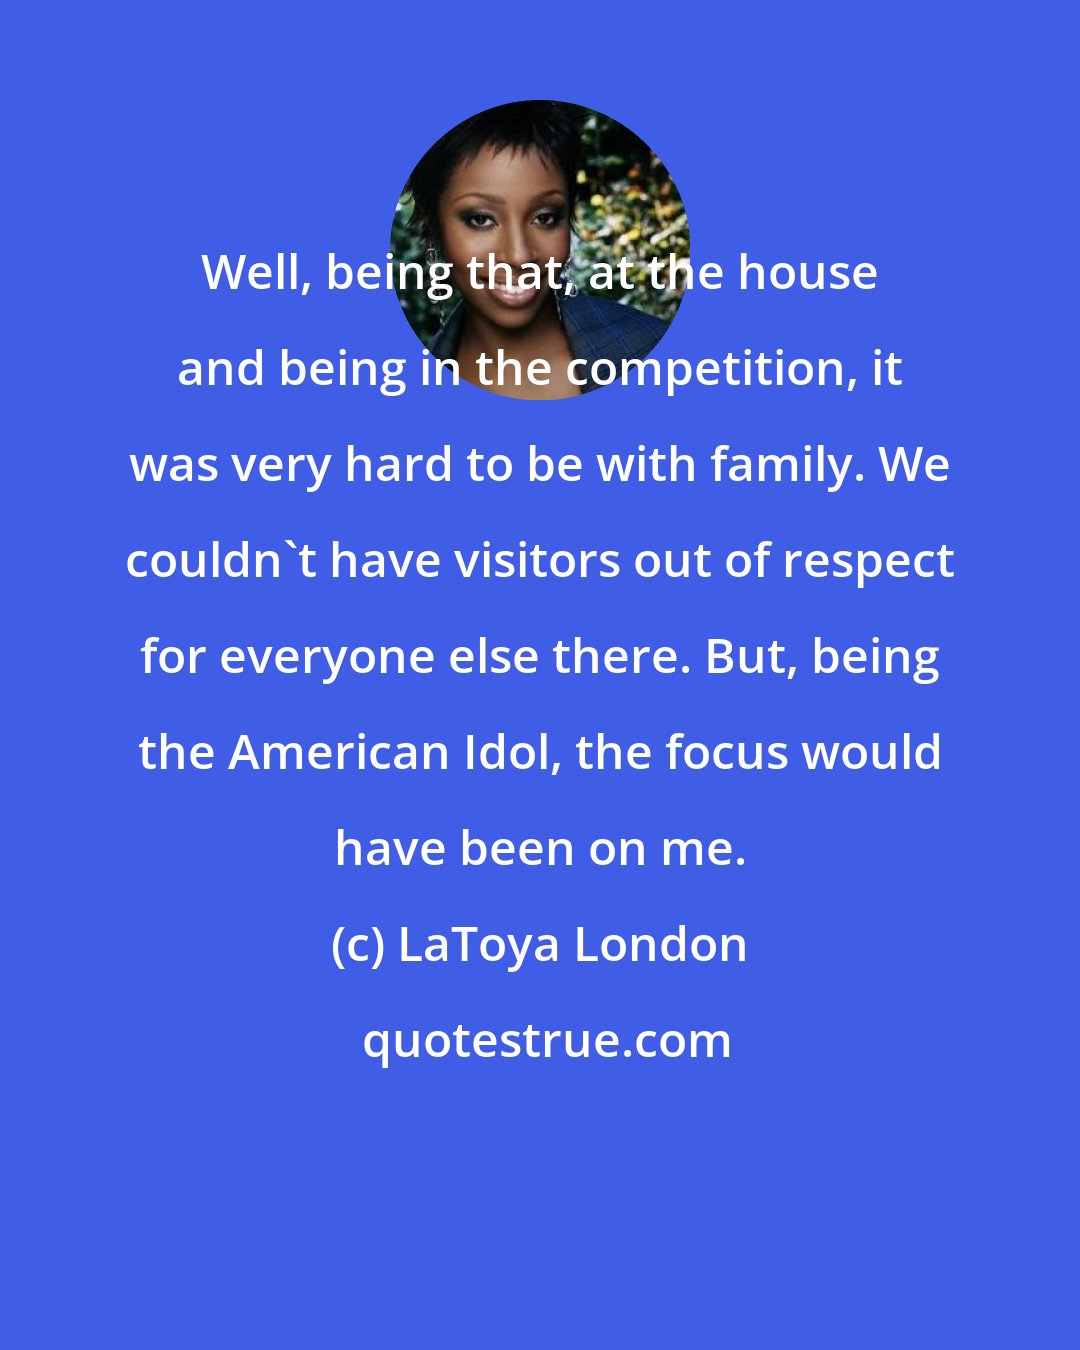 LaToya London: Well, being that, at the house and being in the competition, it was very hard to be with family. We couldn't have visitors out of respect for everyone else there. But, being the American Idol, the focus would have been on me.